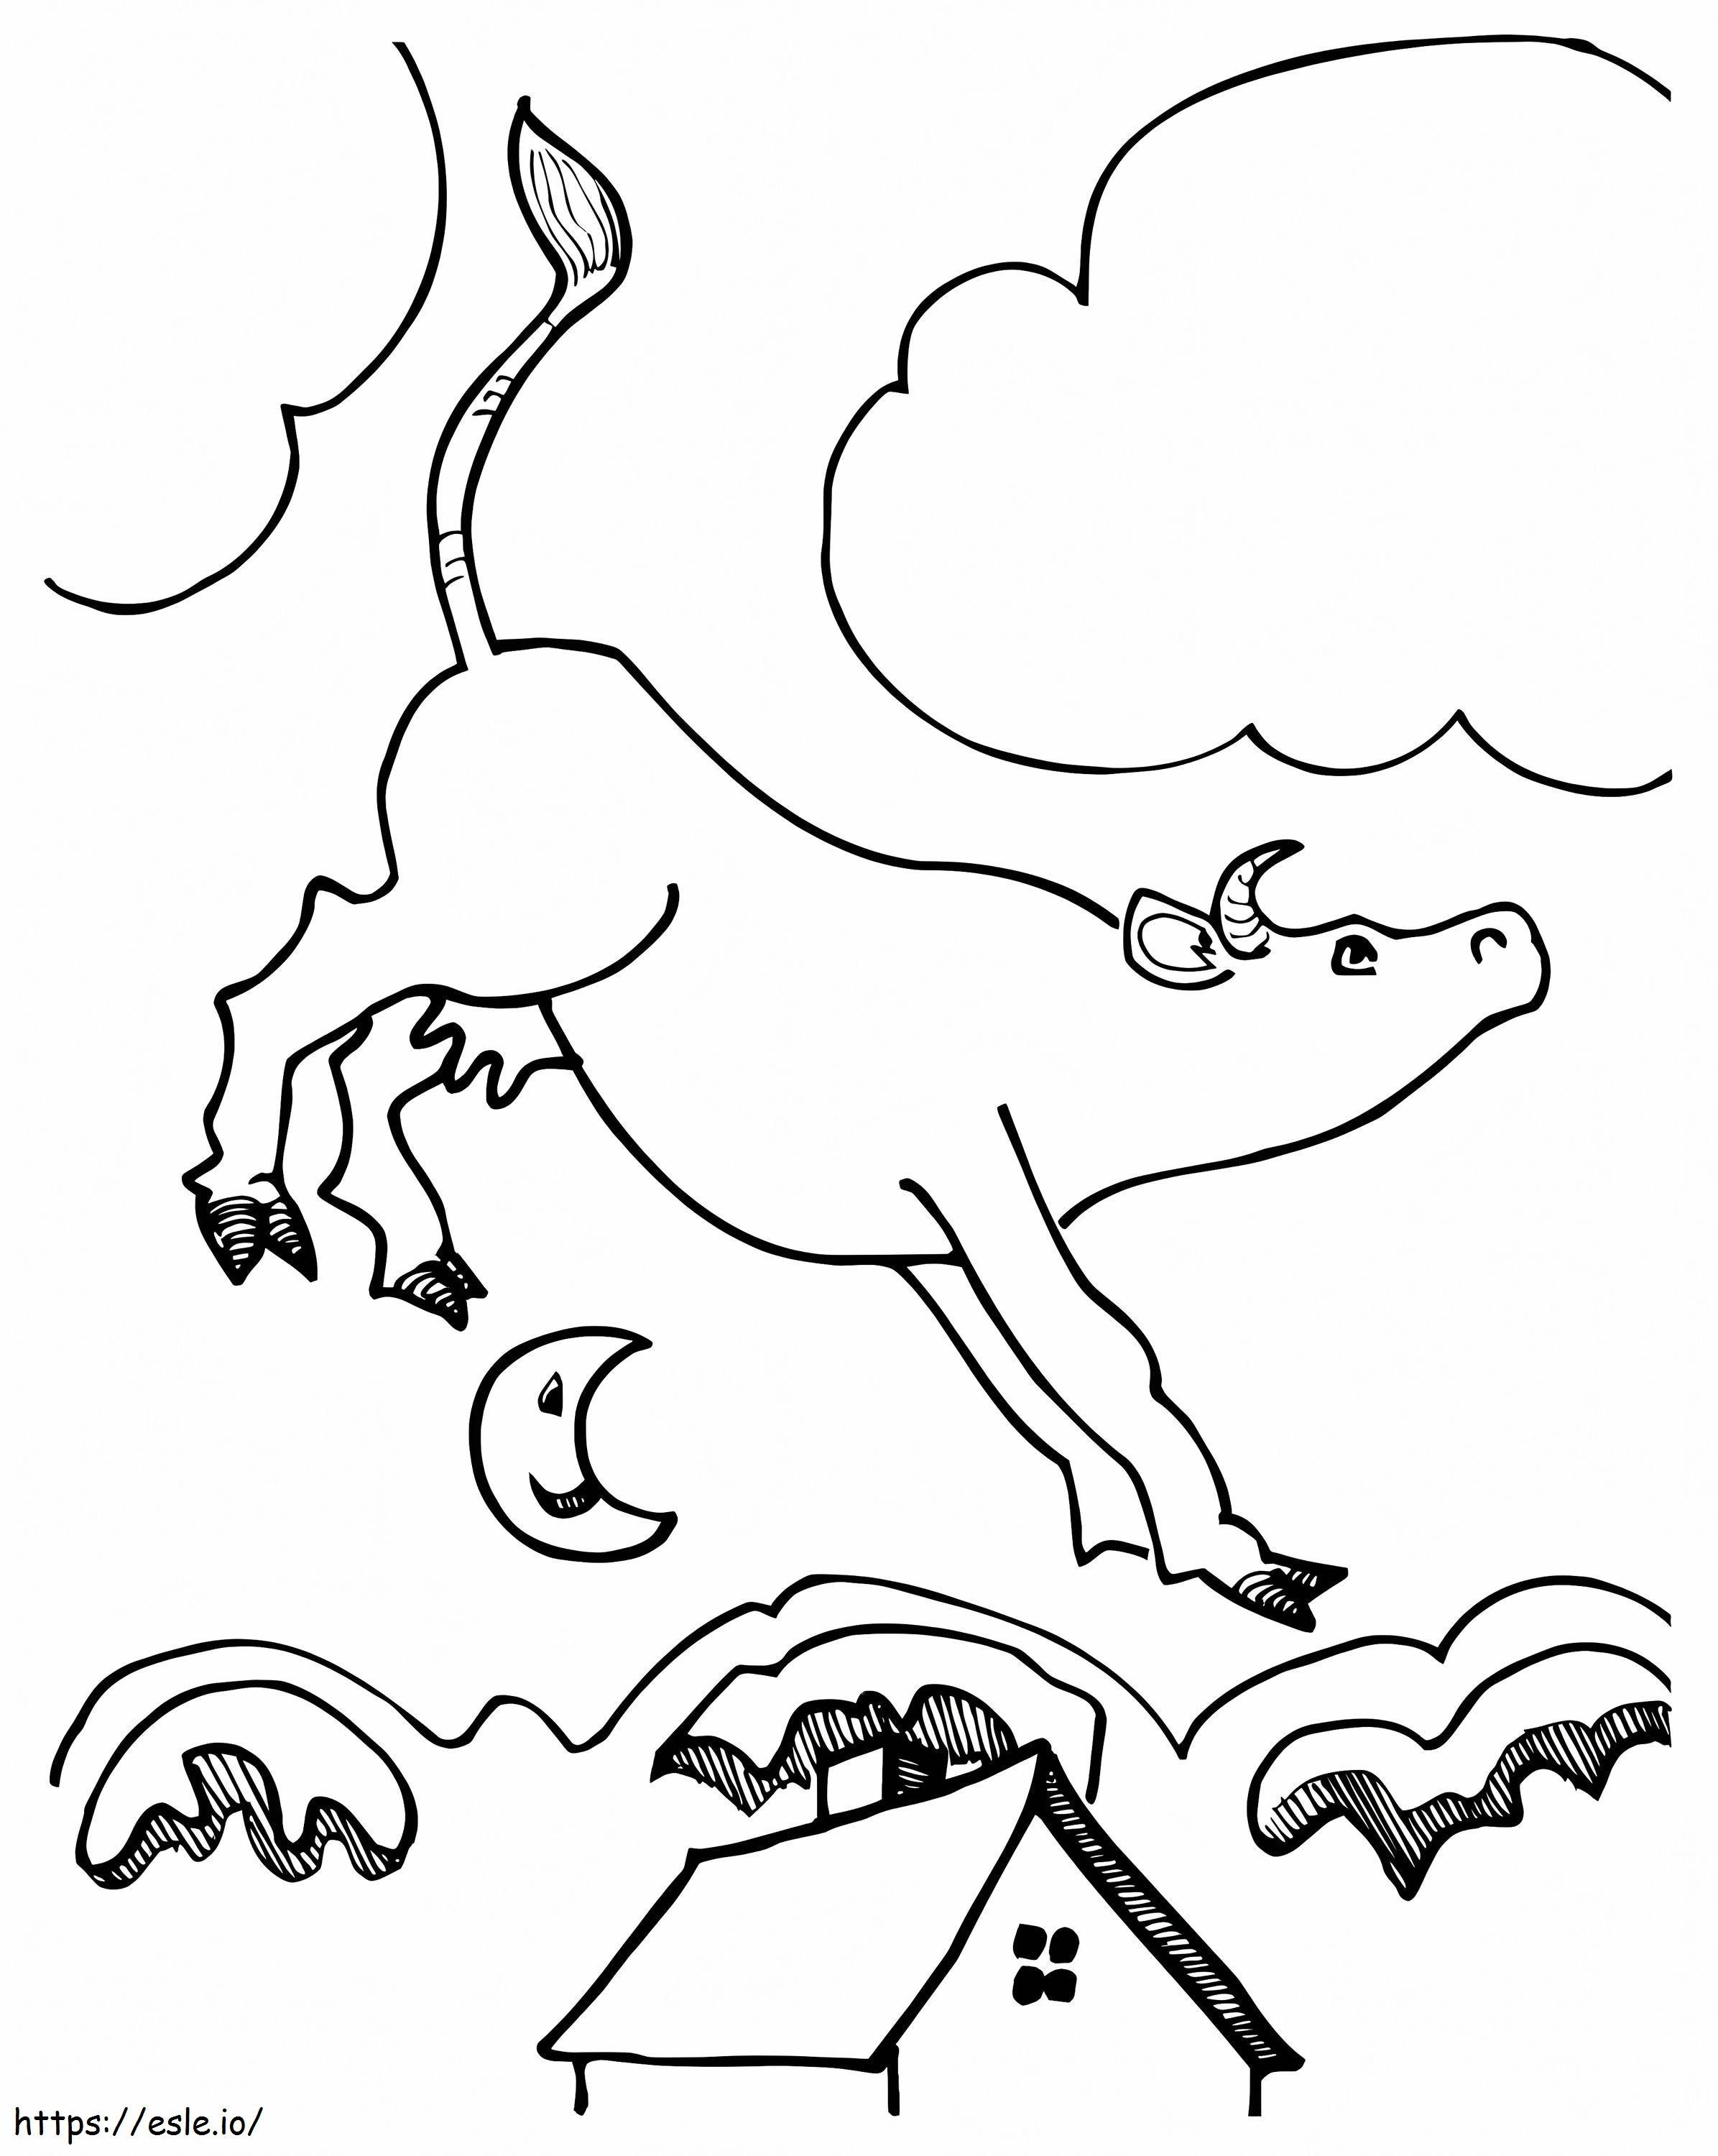 Cow In The Cloud coloring page